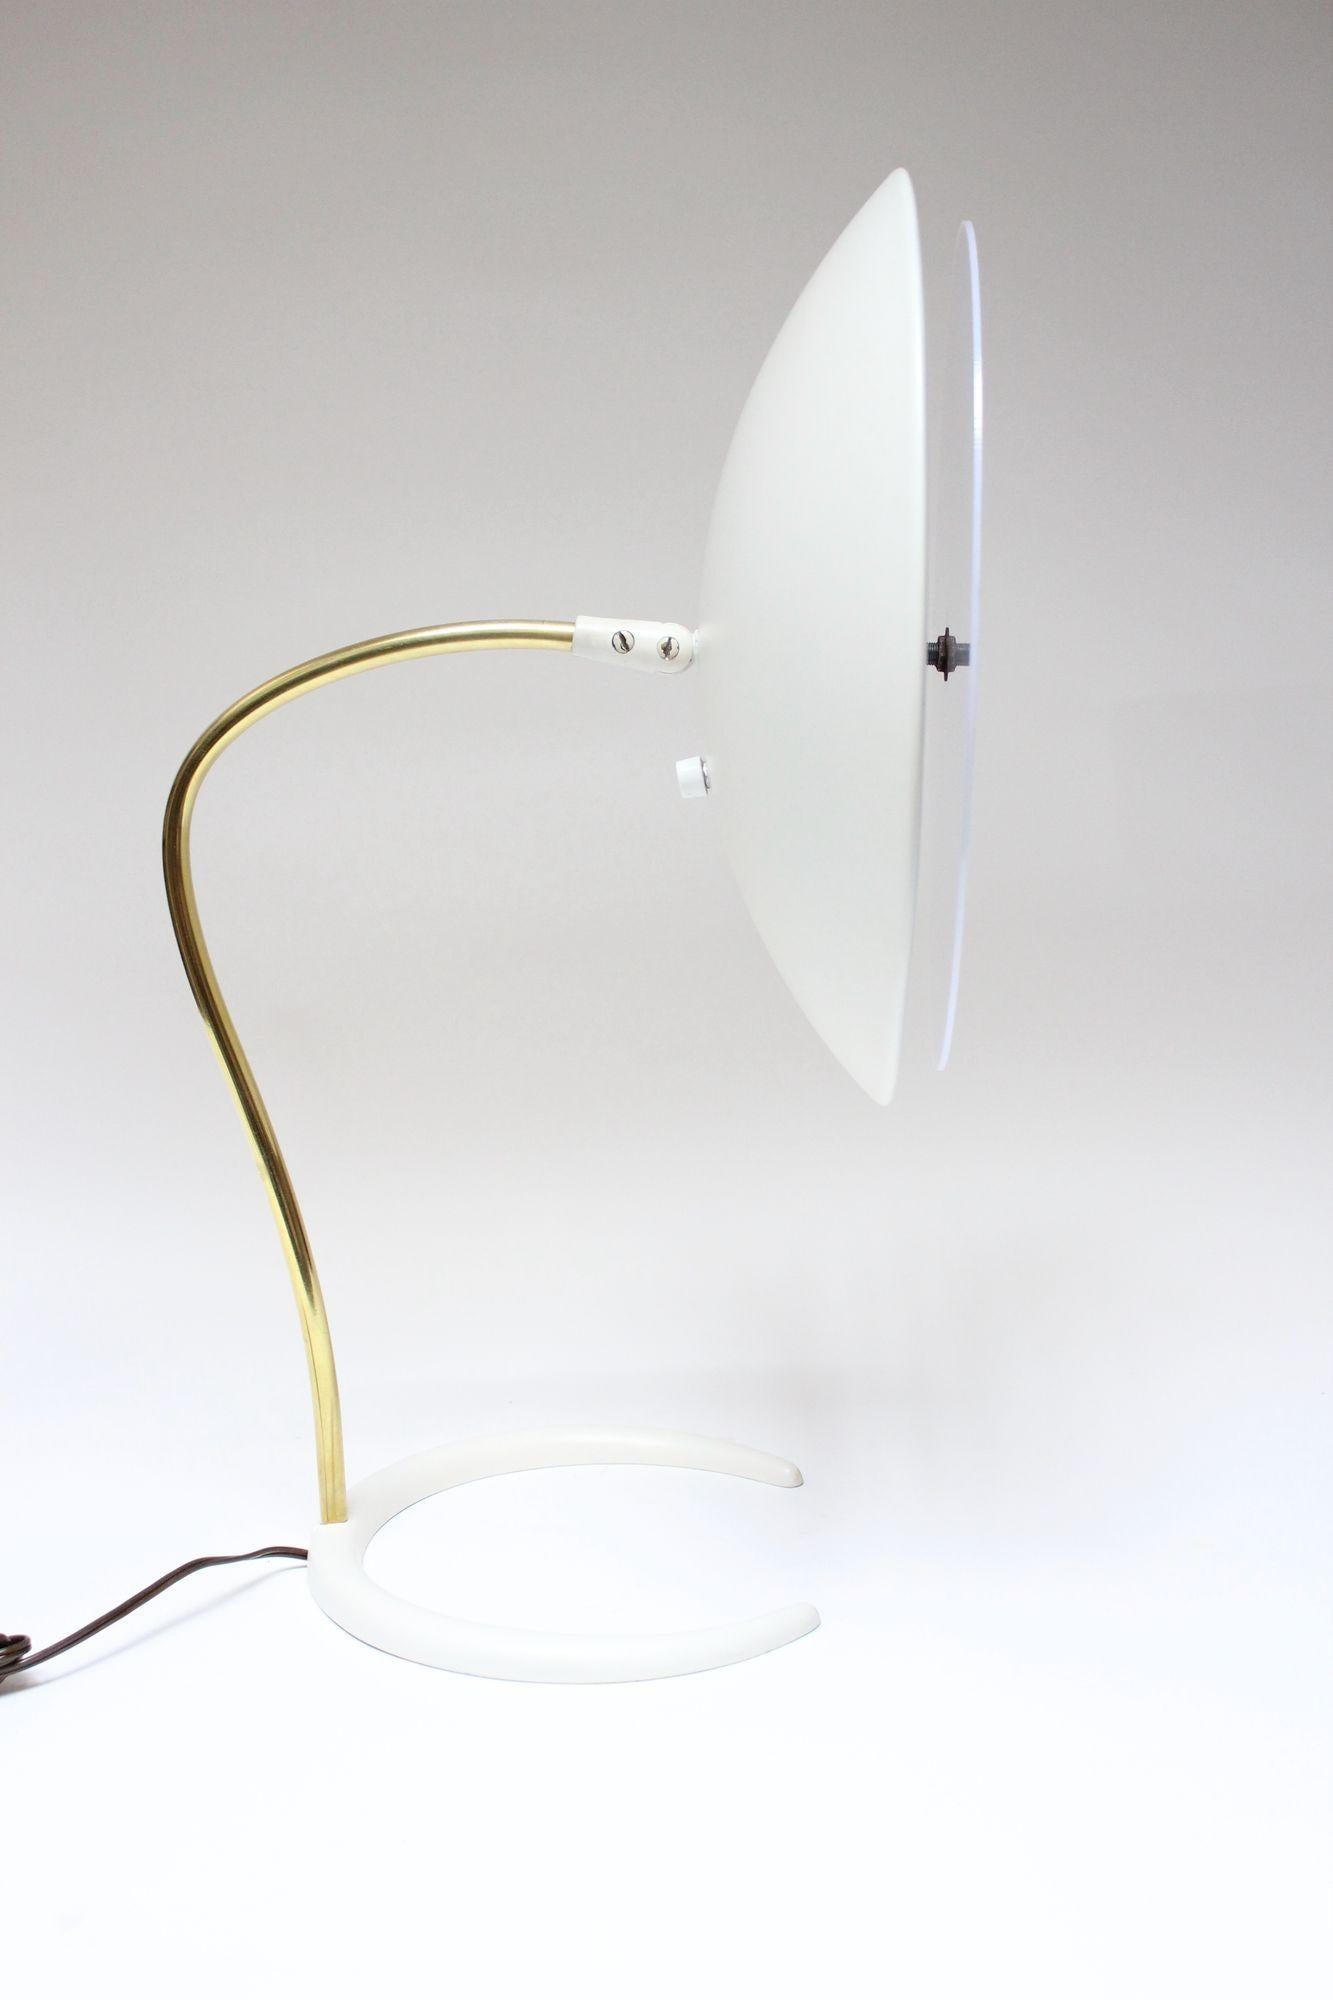 Gerald Thurston for Lightolier table/desk lamp with oversized, fully adjustable/hinged shade, brass stem and crescent base (ca. 1950s, USA). A plexi diffuser has been added (not original to the piece and not required for use). Retains the original